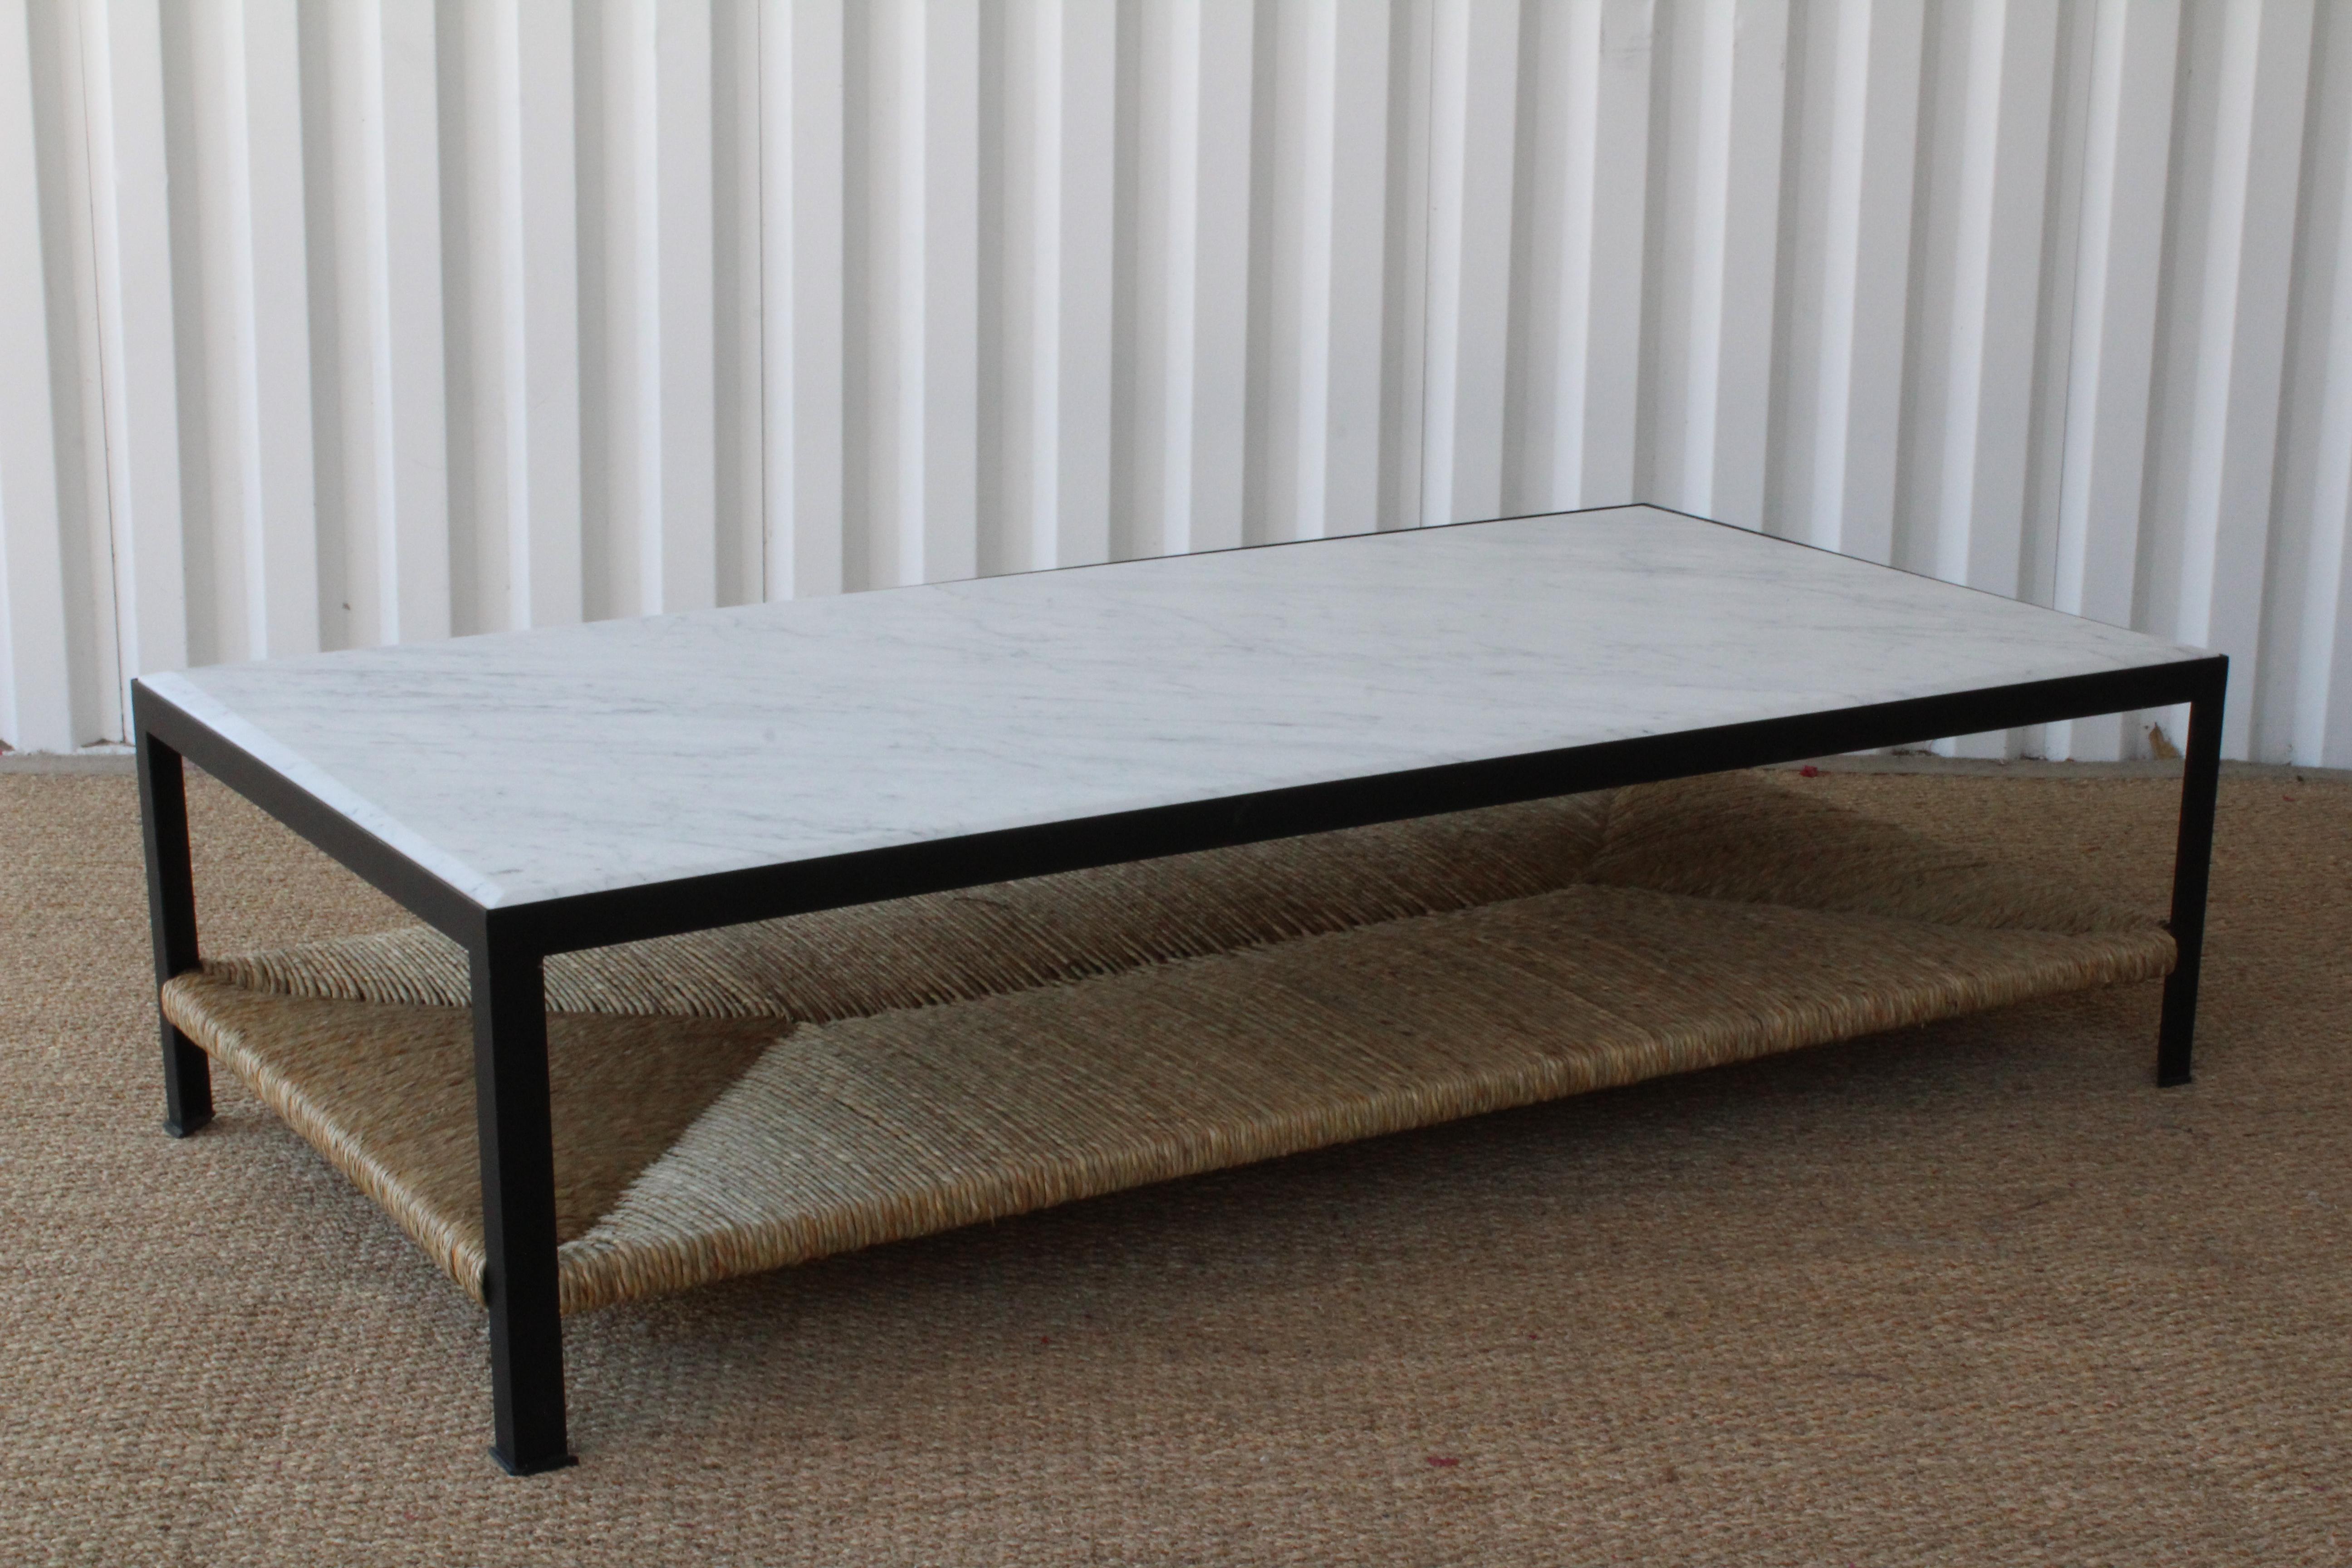 Custom steel framed coffee table with a marble top and handwoven rush shelf. The steel frame has been powder coated black. The marble top features a beveled detail.